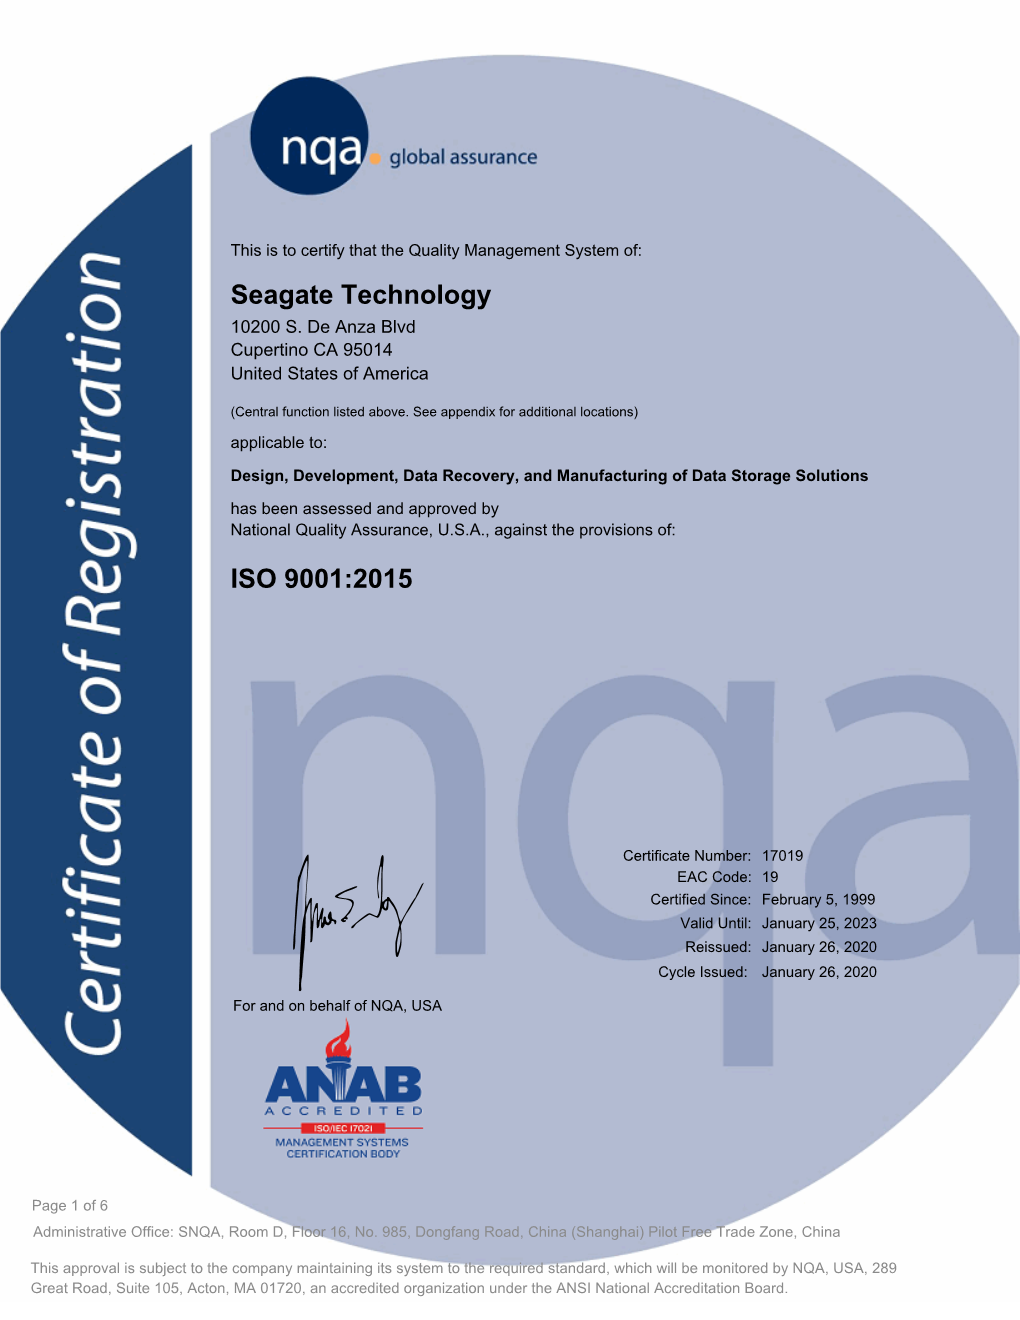 Seagate Technology ISO 9001:2015